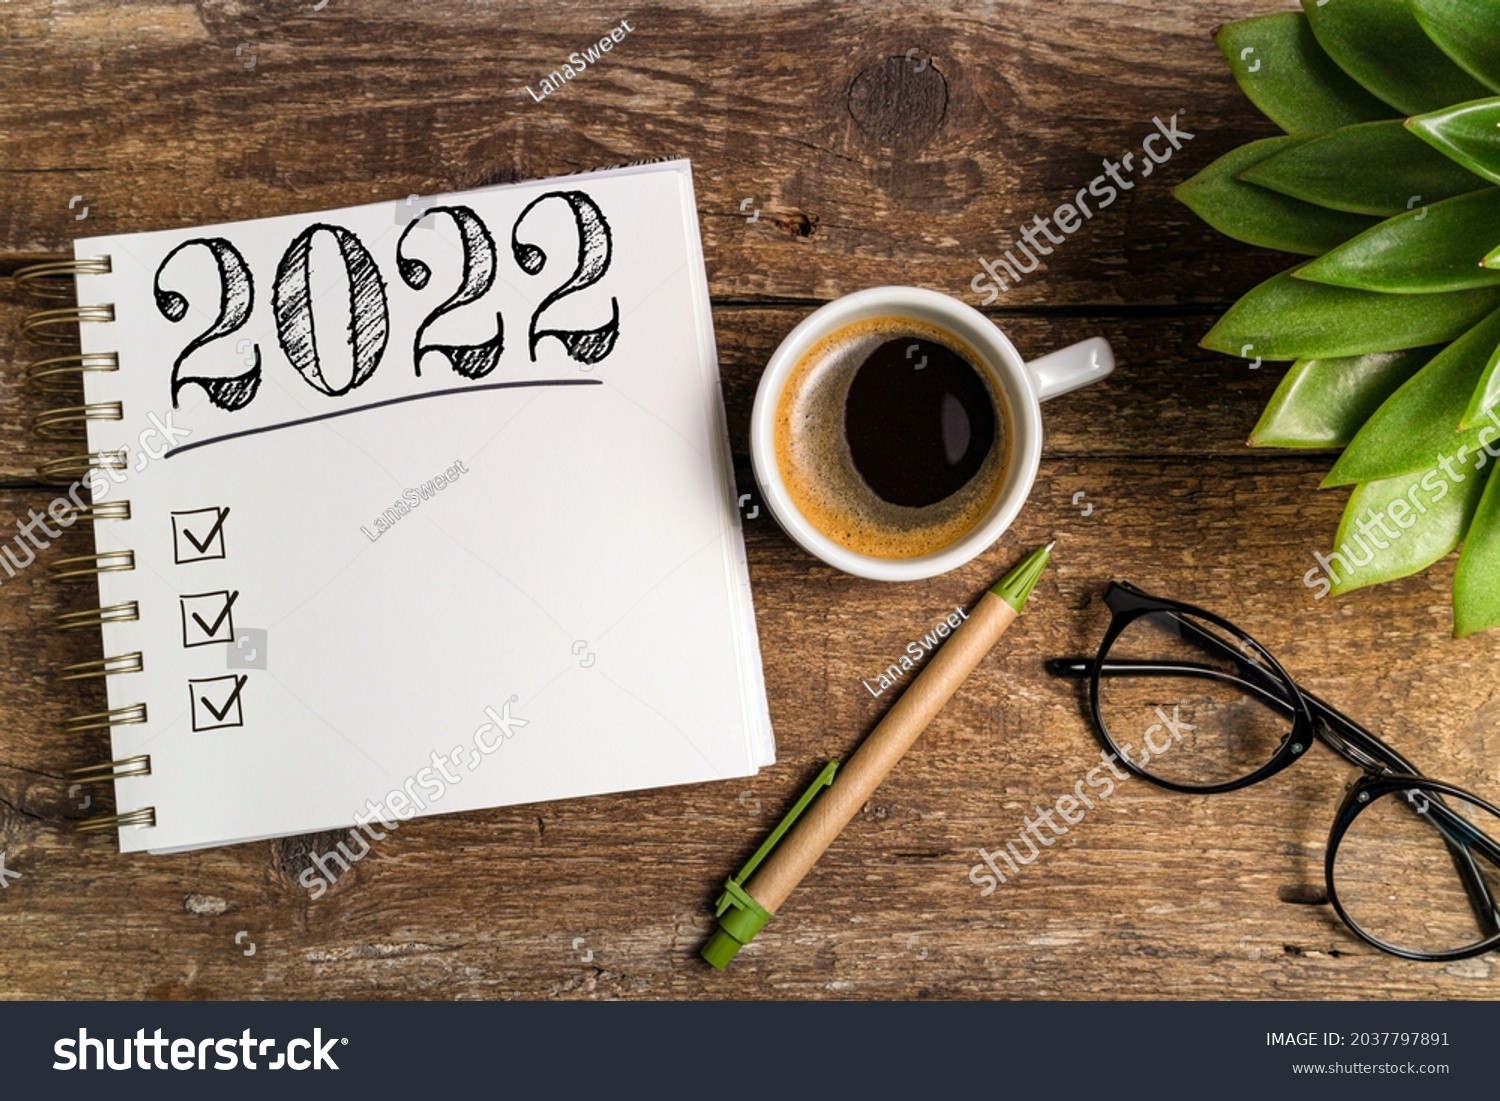 New year goals 2022 on desk. 2022 goals list with notebook, coffee cup, plant on wooden table. Resolutions, plan, goals, action, checklist, idea concept. New Year 2022 template, copy space #2037797891